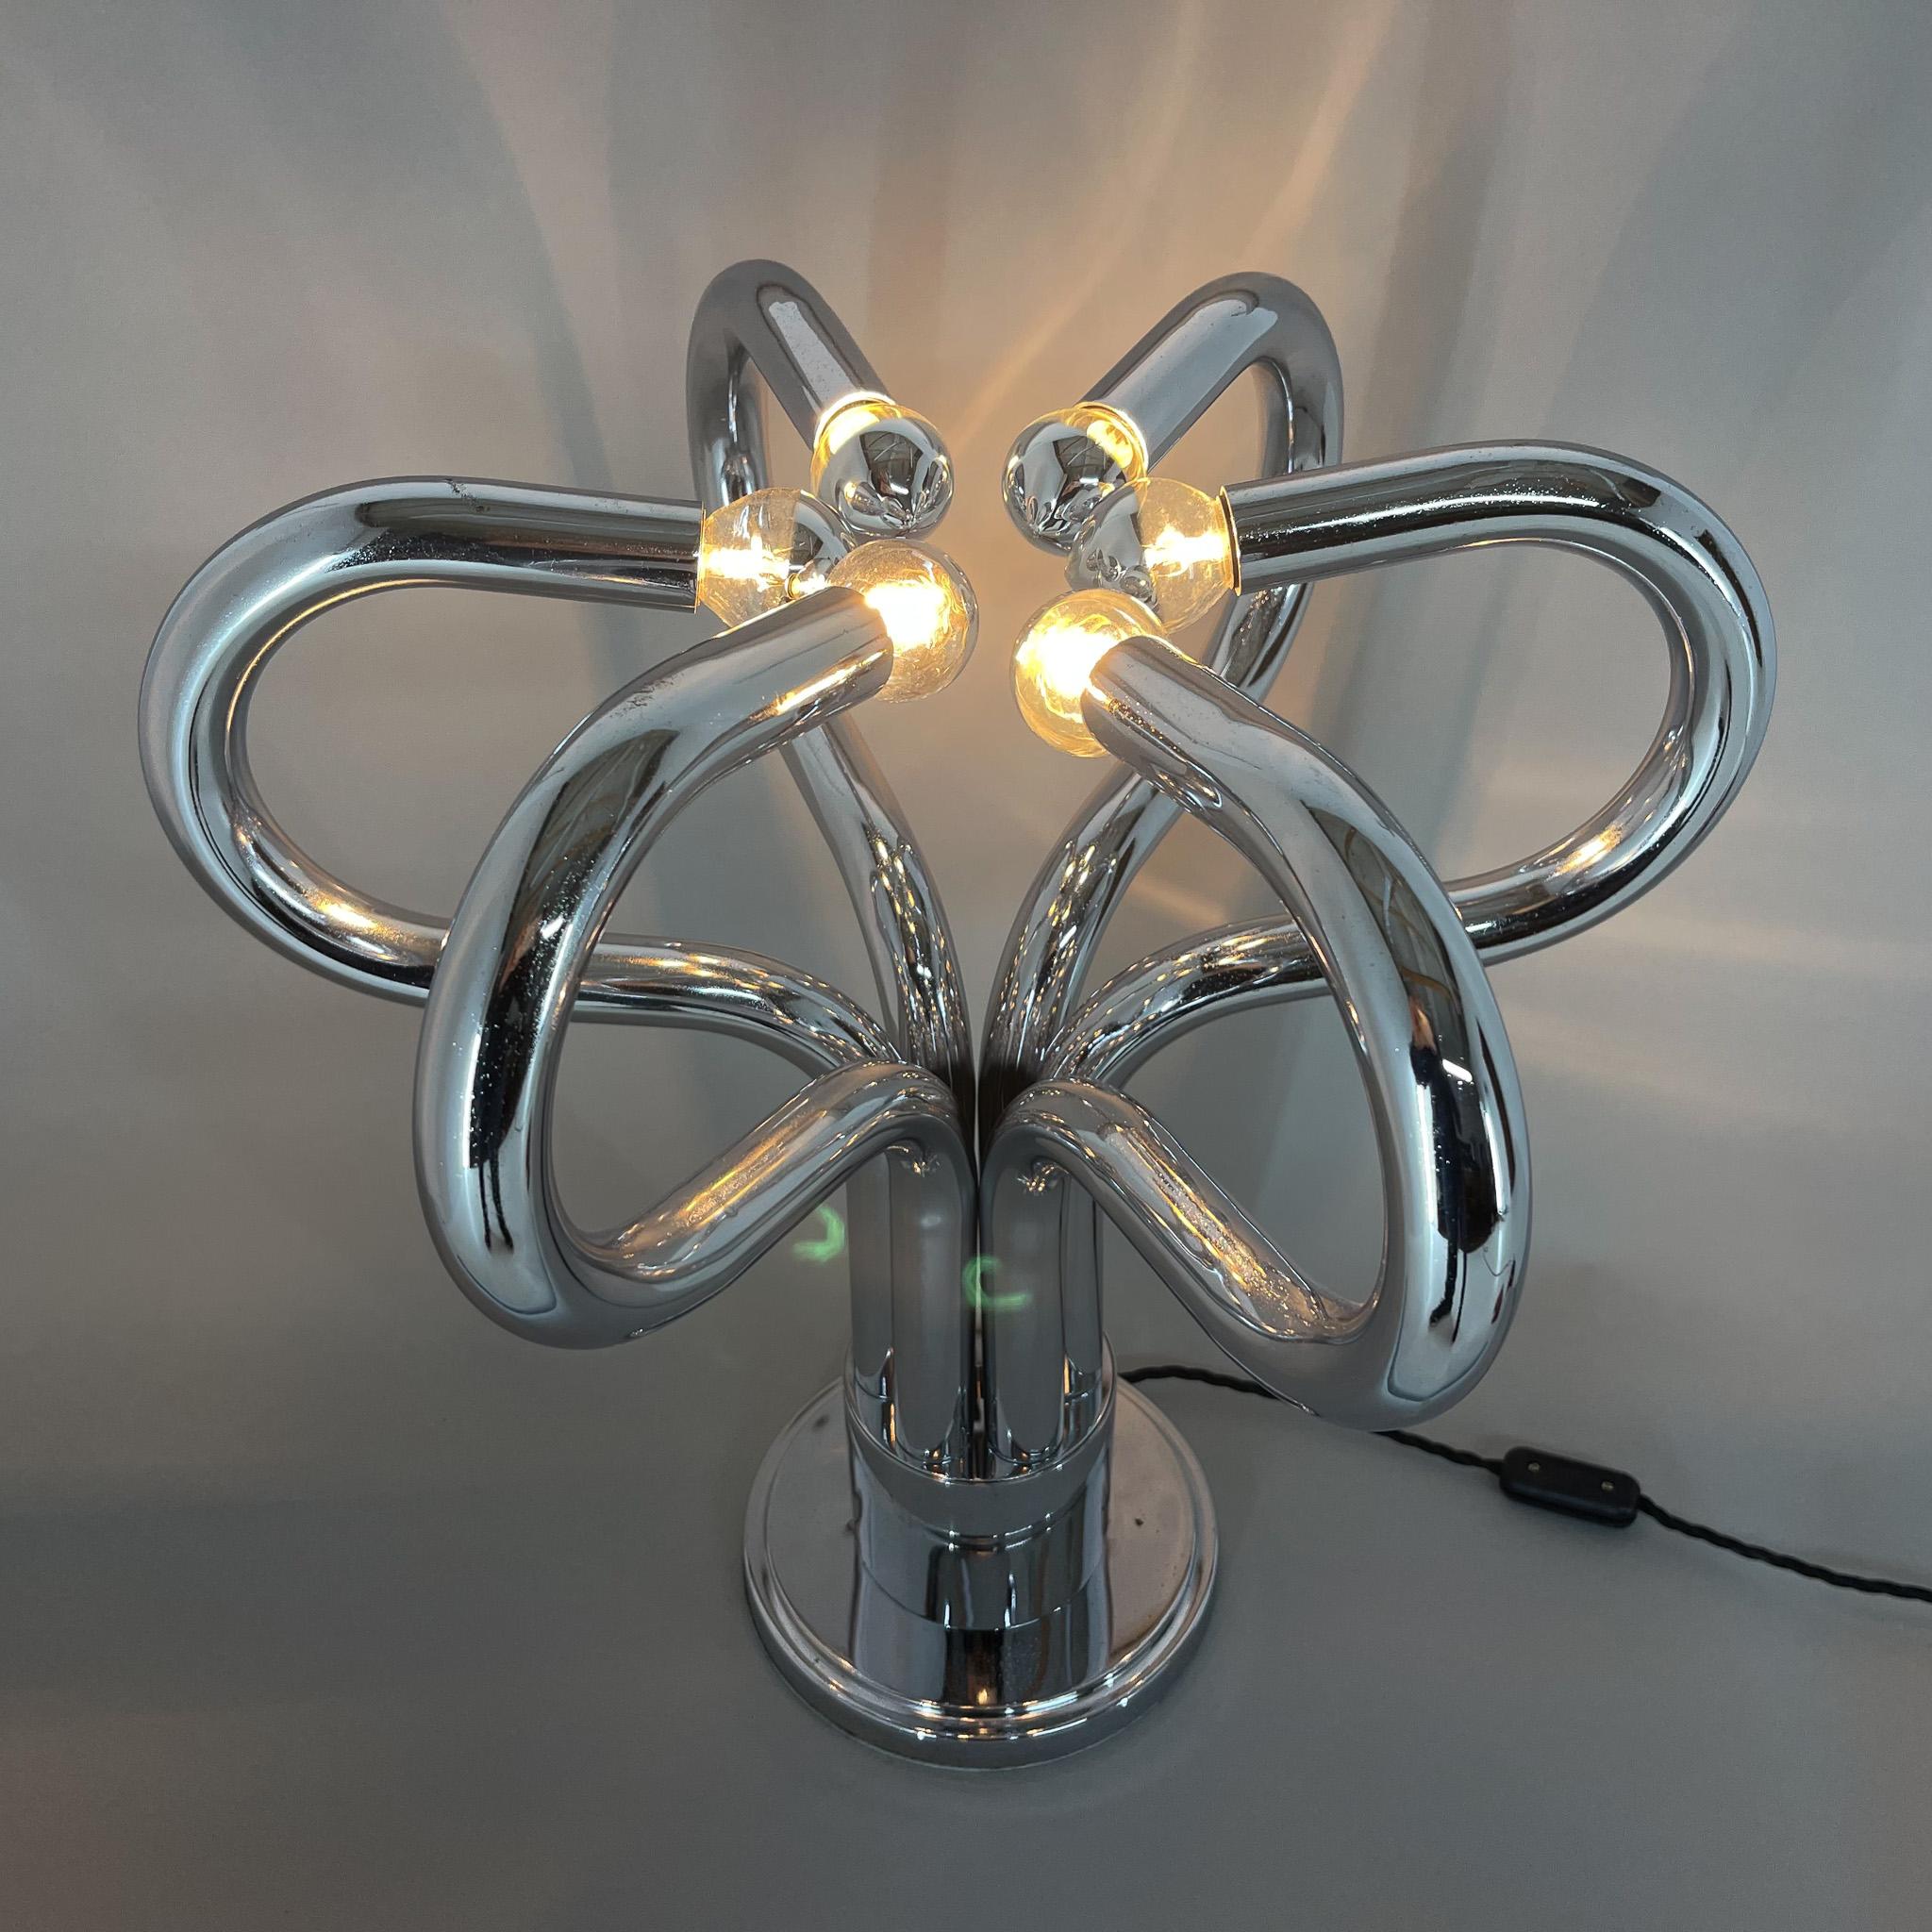 1970's Rare Italian Chrome Space Age Table Lamp by Stilux Milano For Sale 7